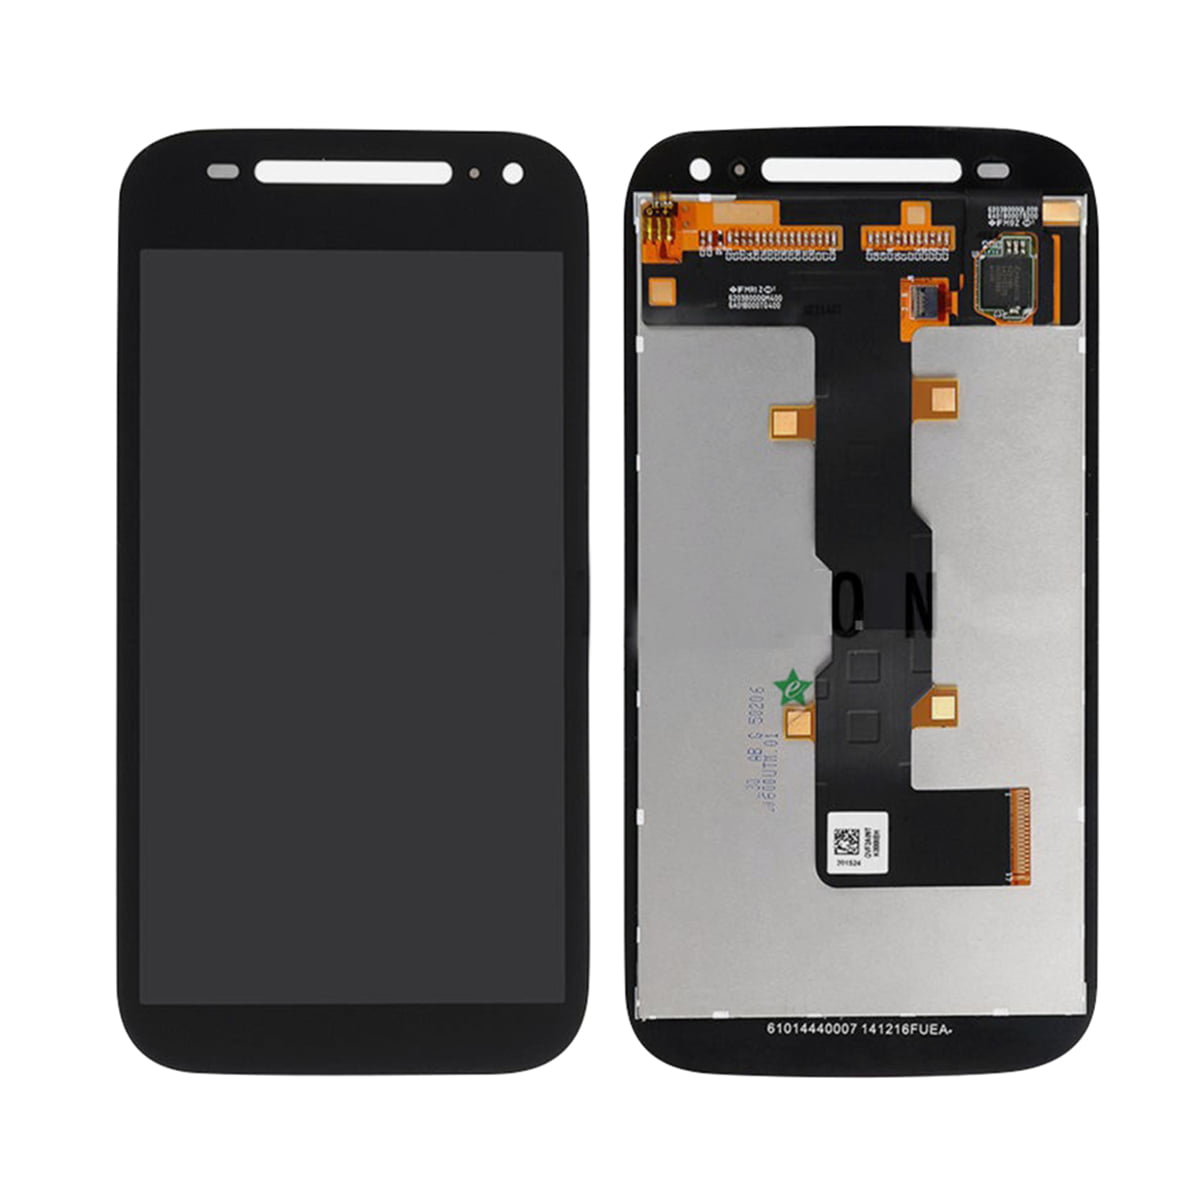 Replacement Display LCD Screen Digitizer Assembly + Frame